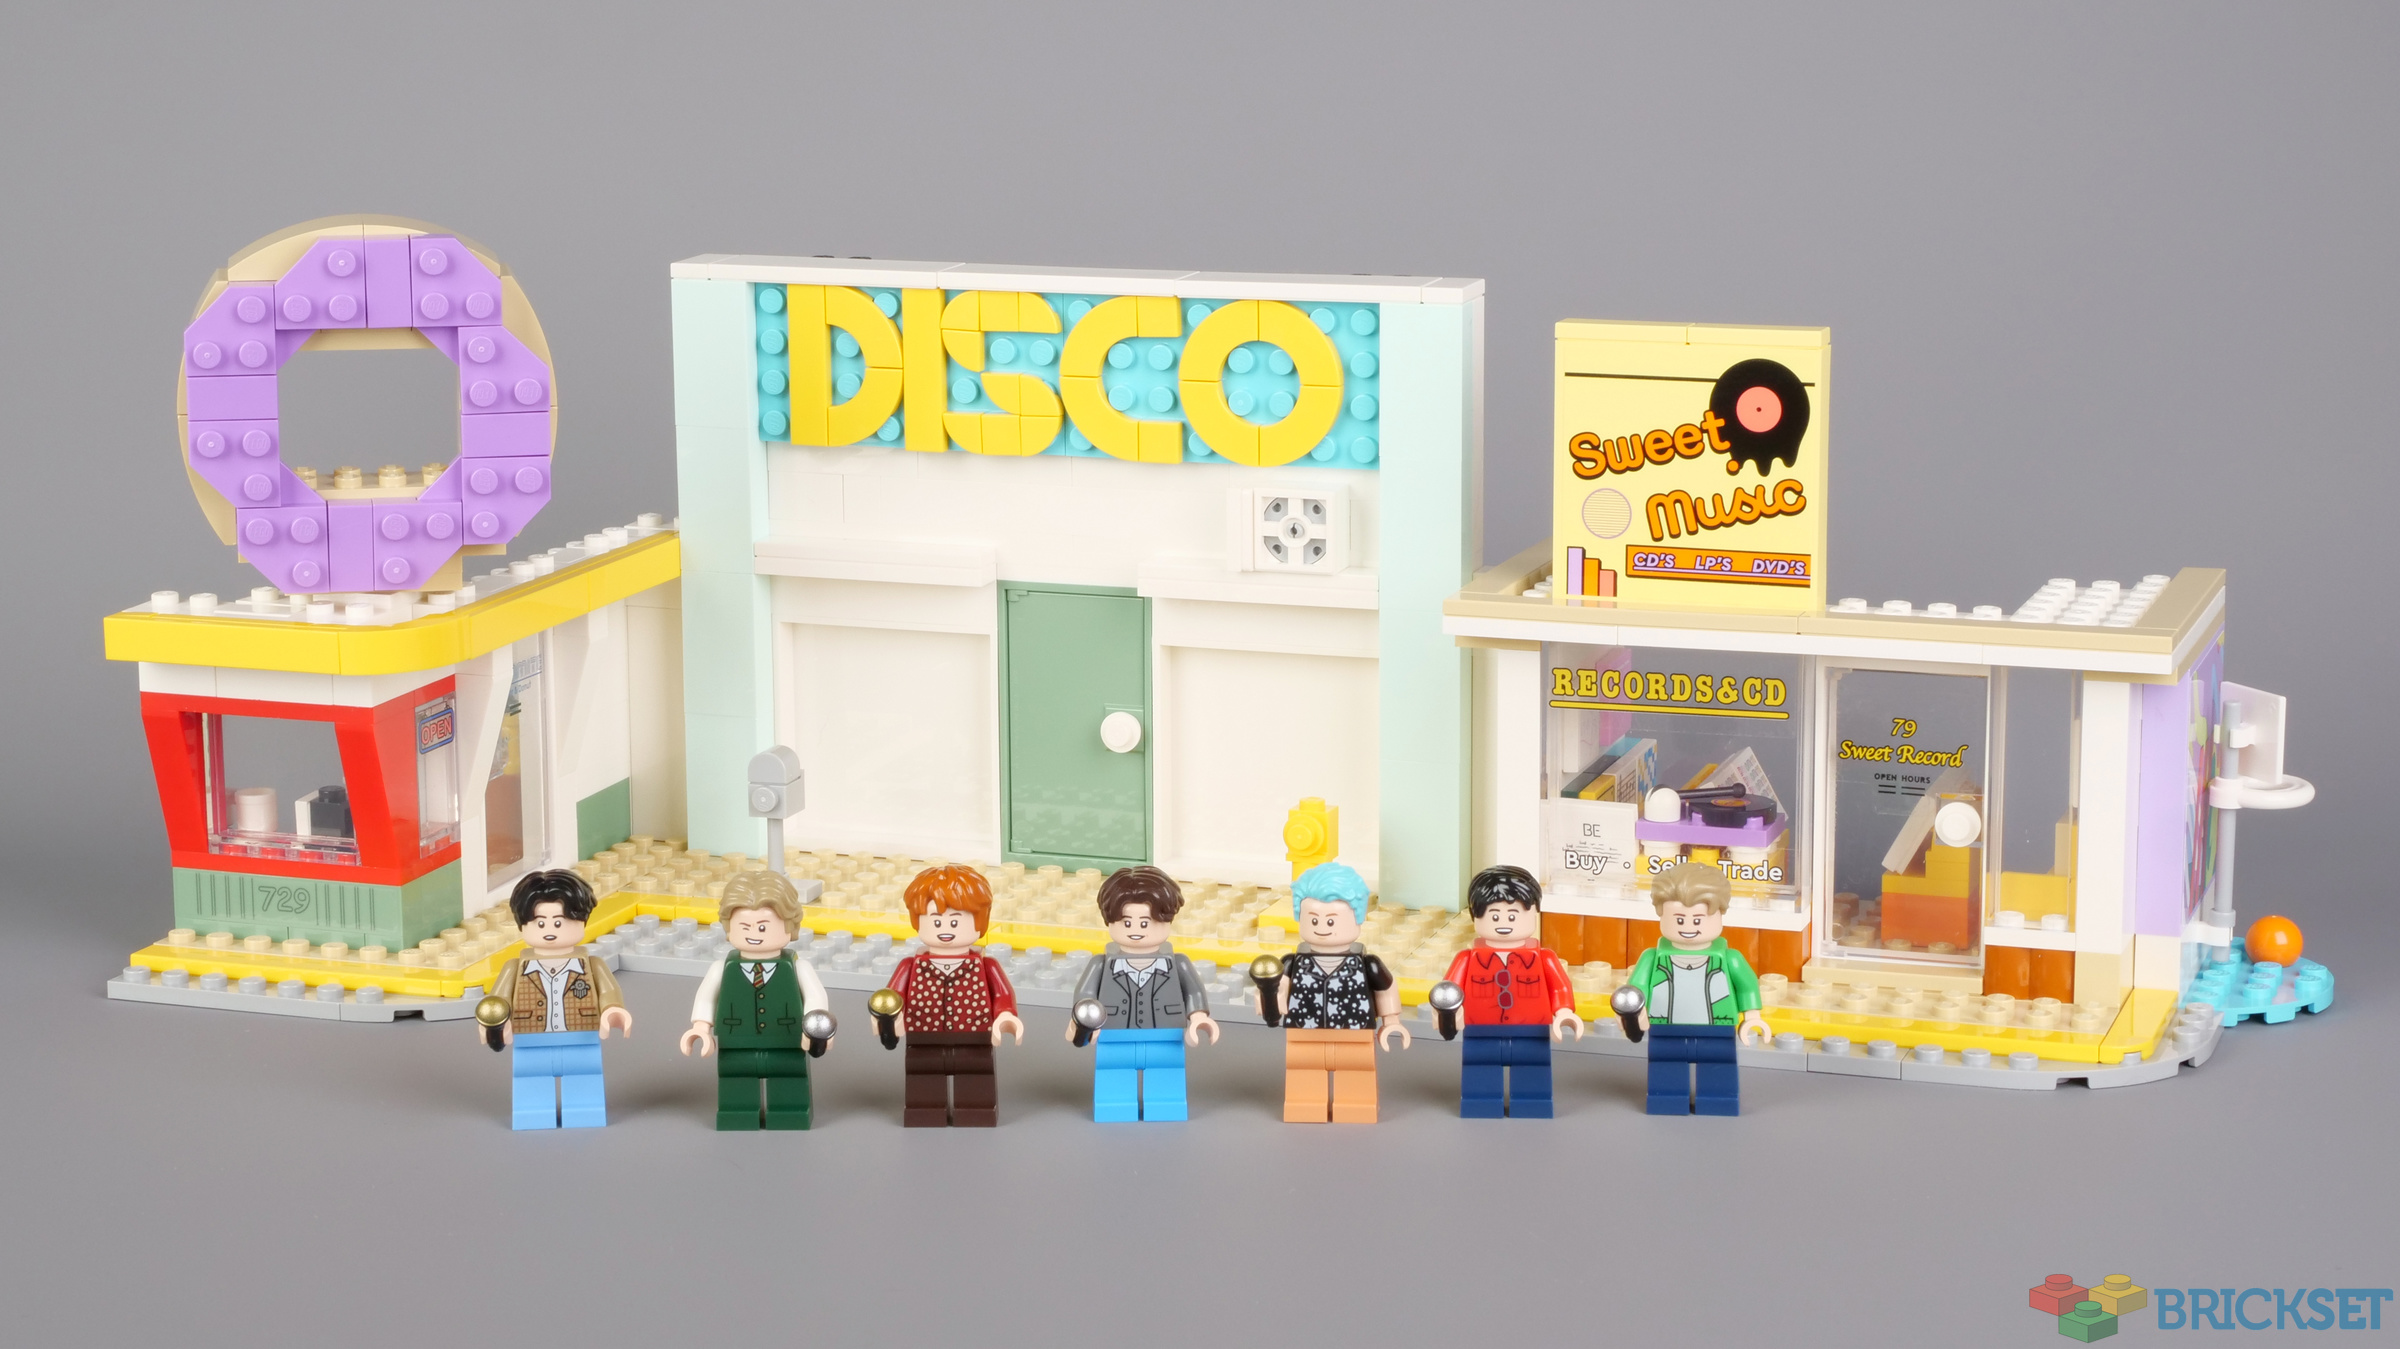 Pack of 4 Skirts for LEGO Mini-doll sheen 